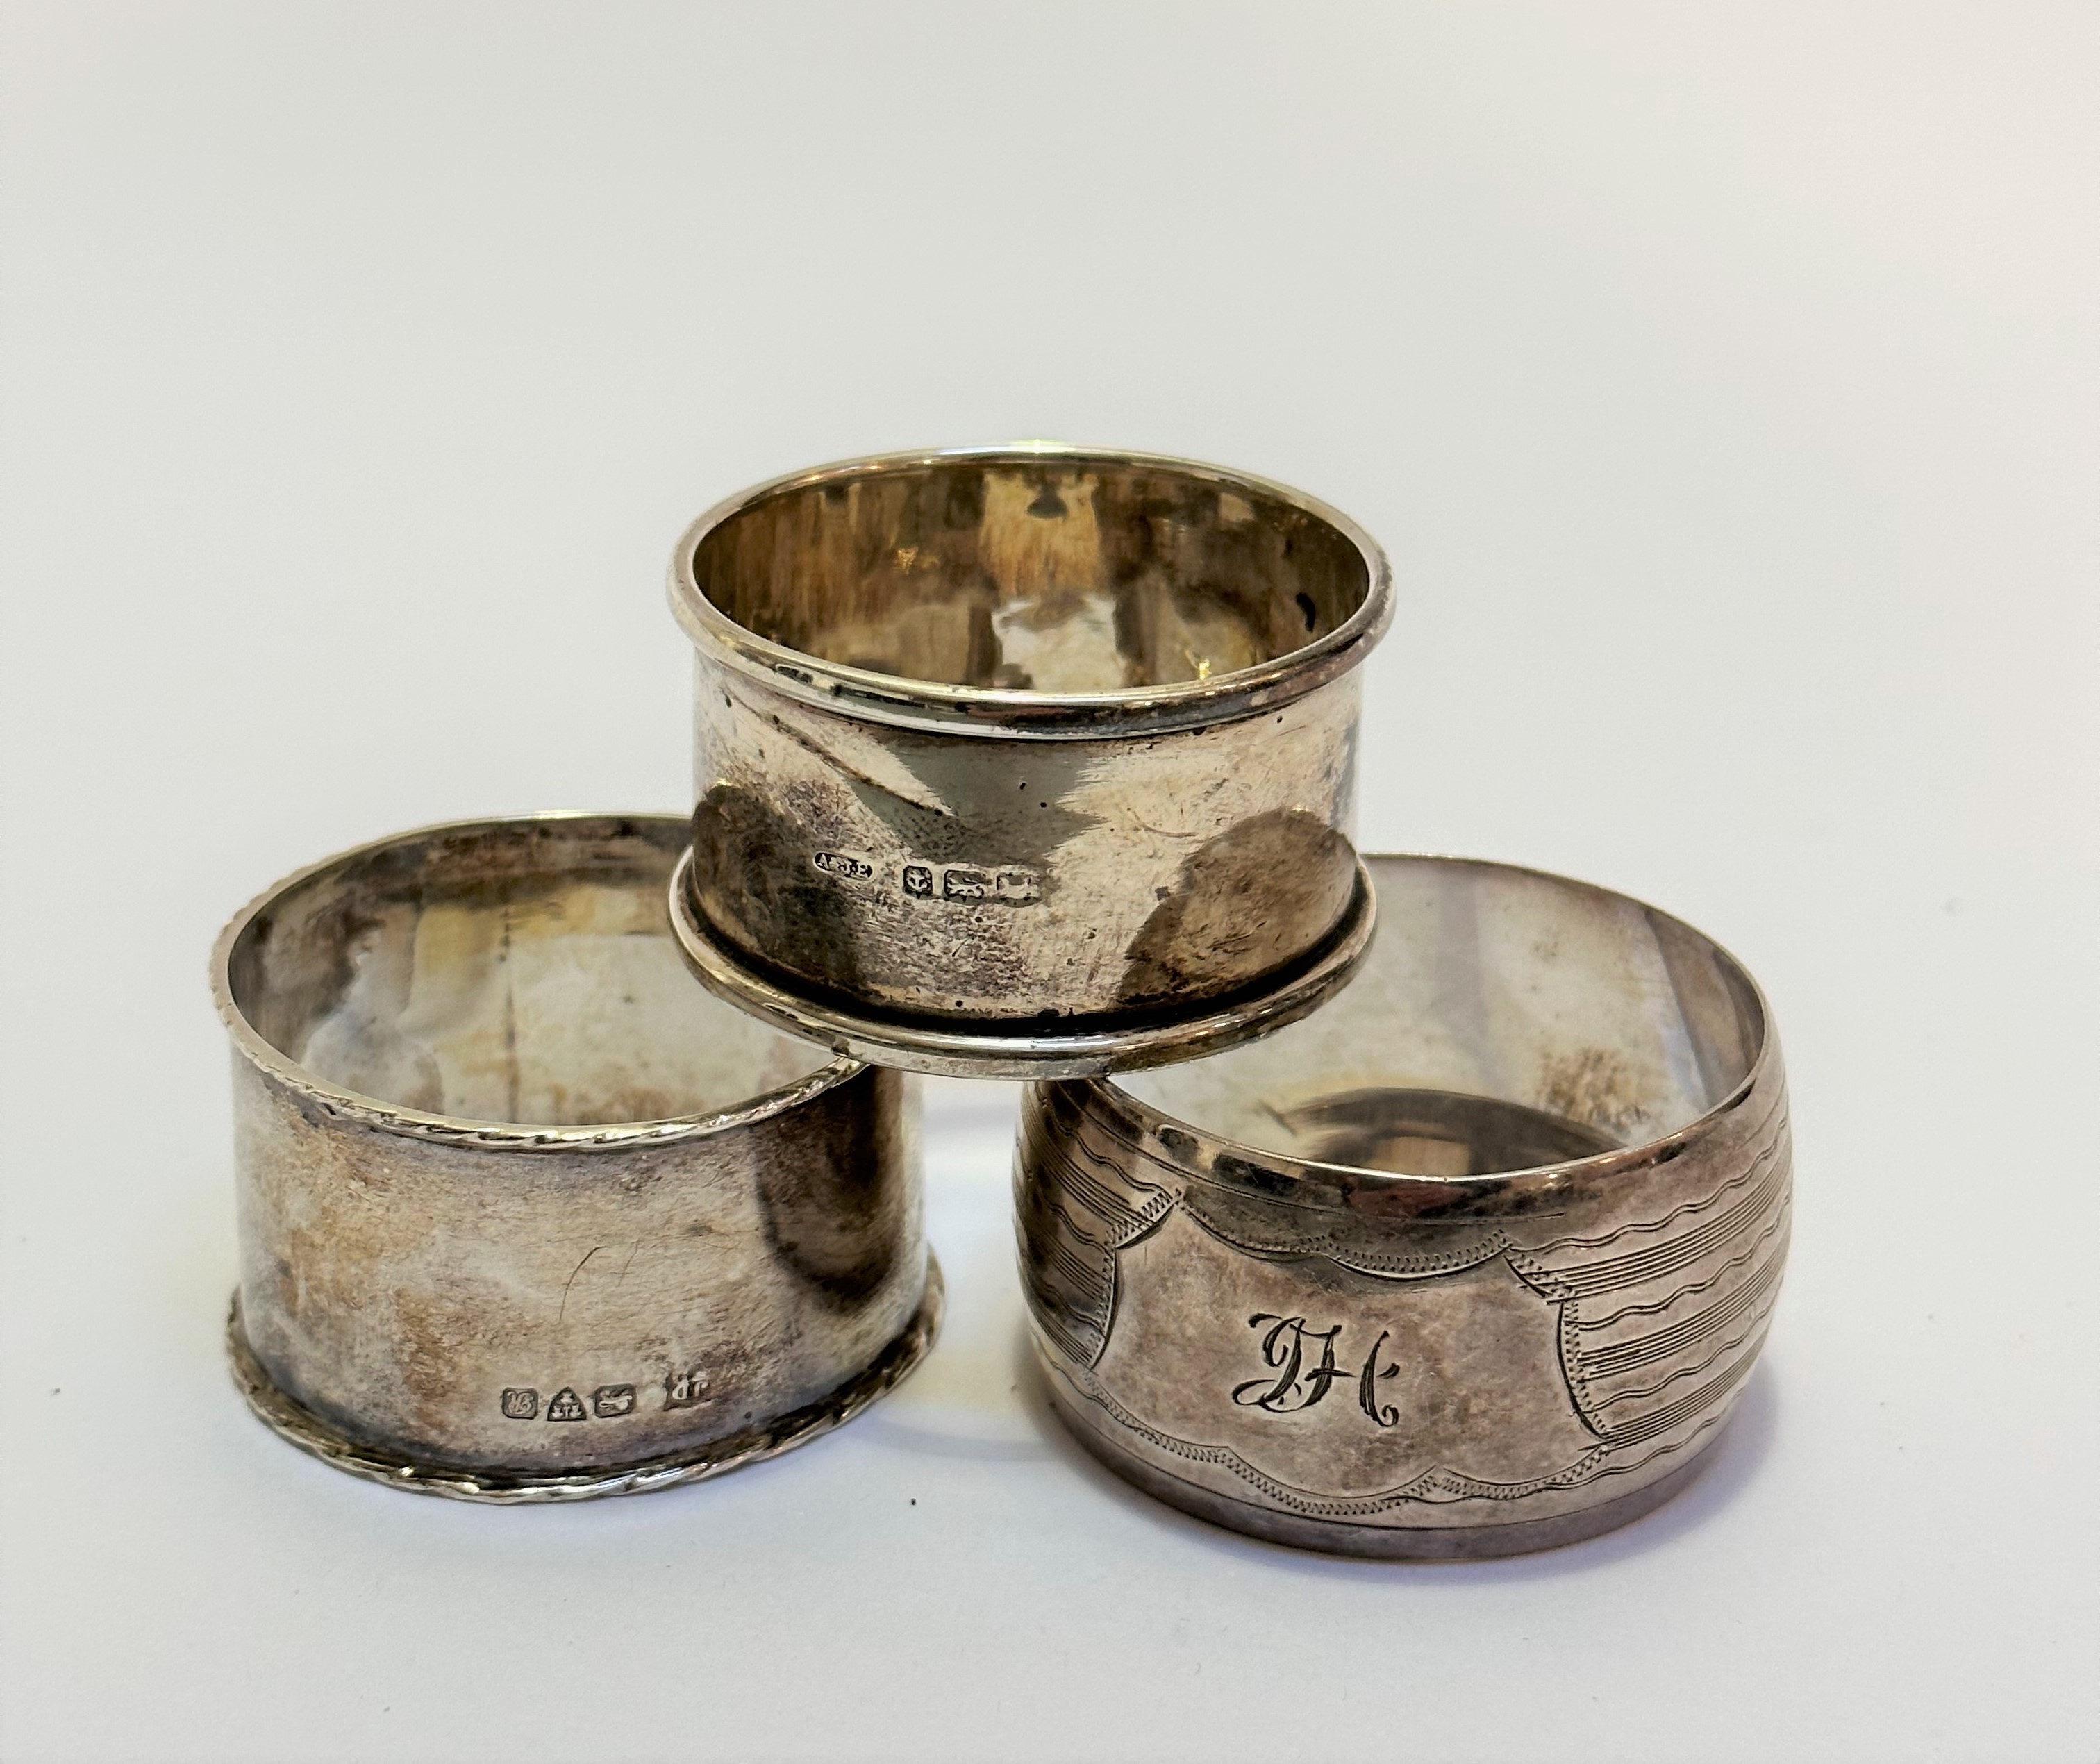 A Birmingham silver napkin ring and a Birmingham silver engraved napkin ring with engraved